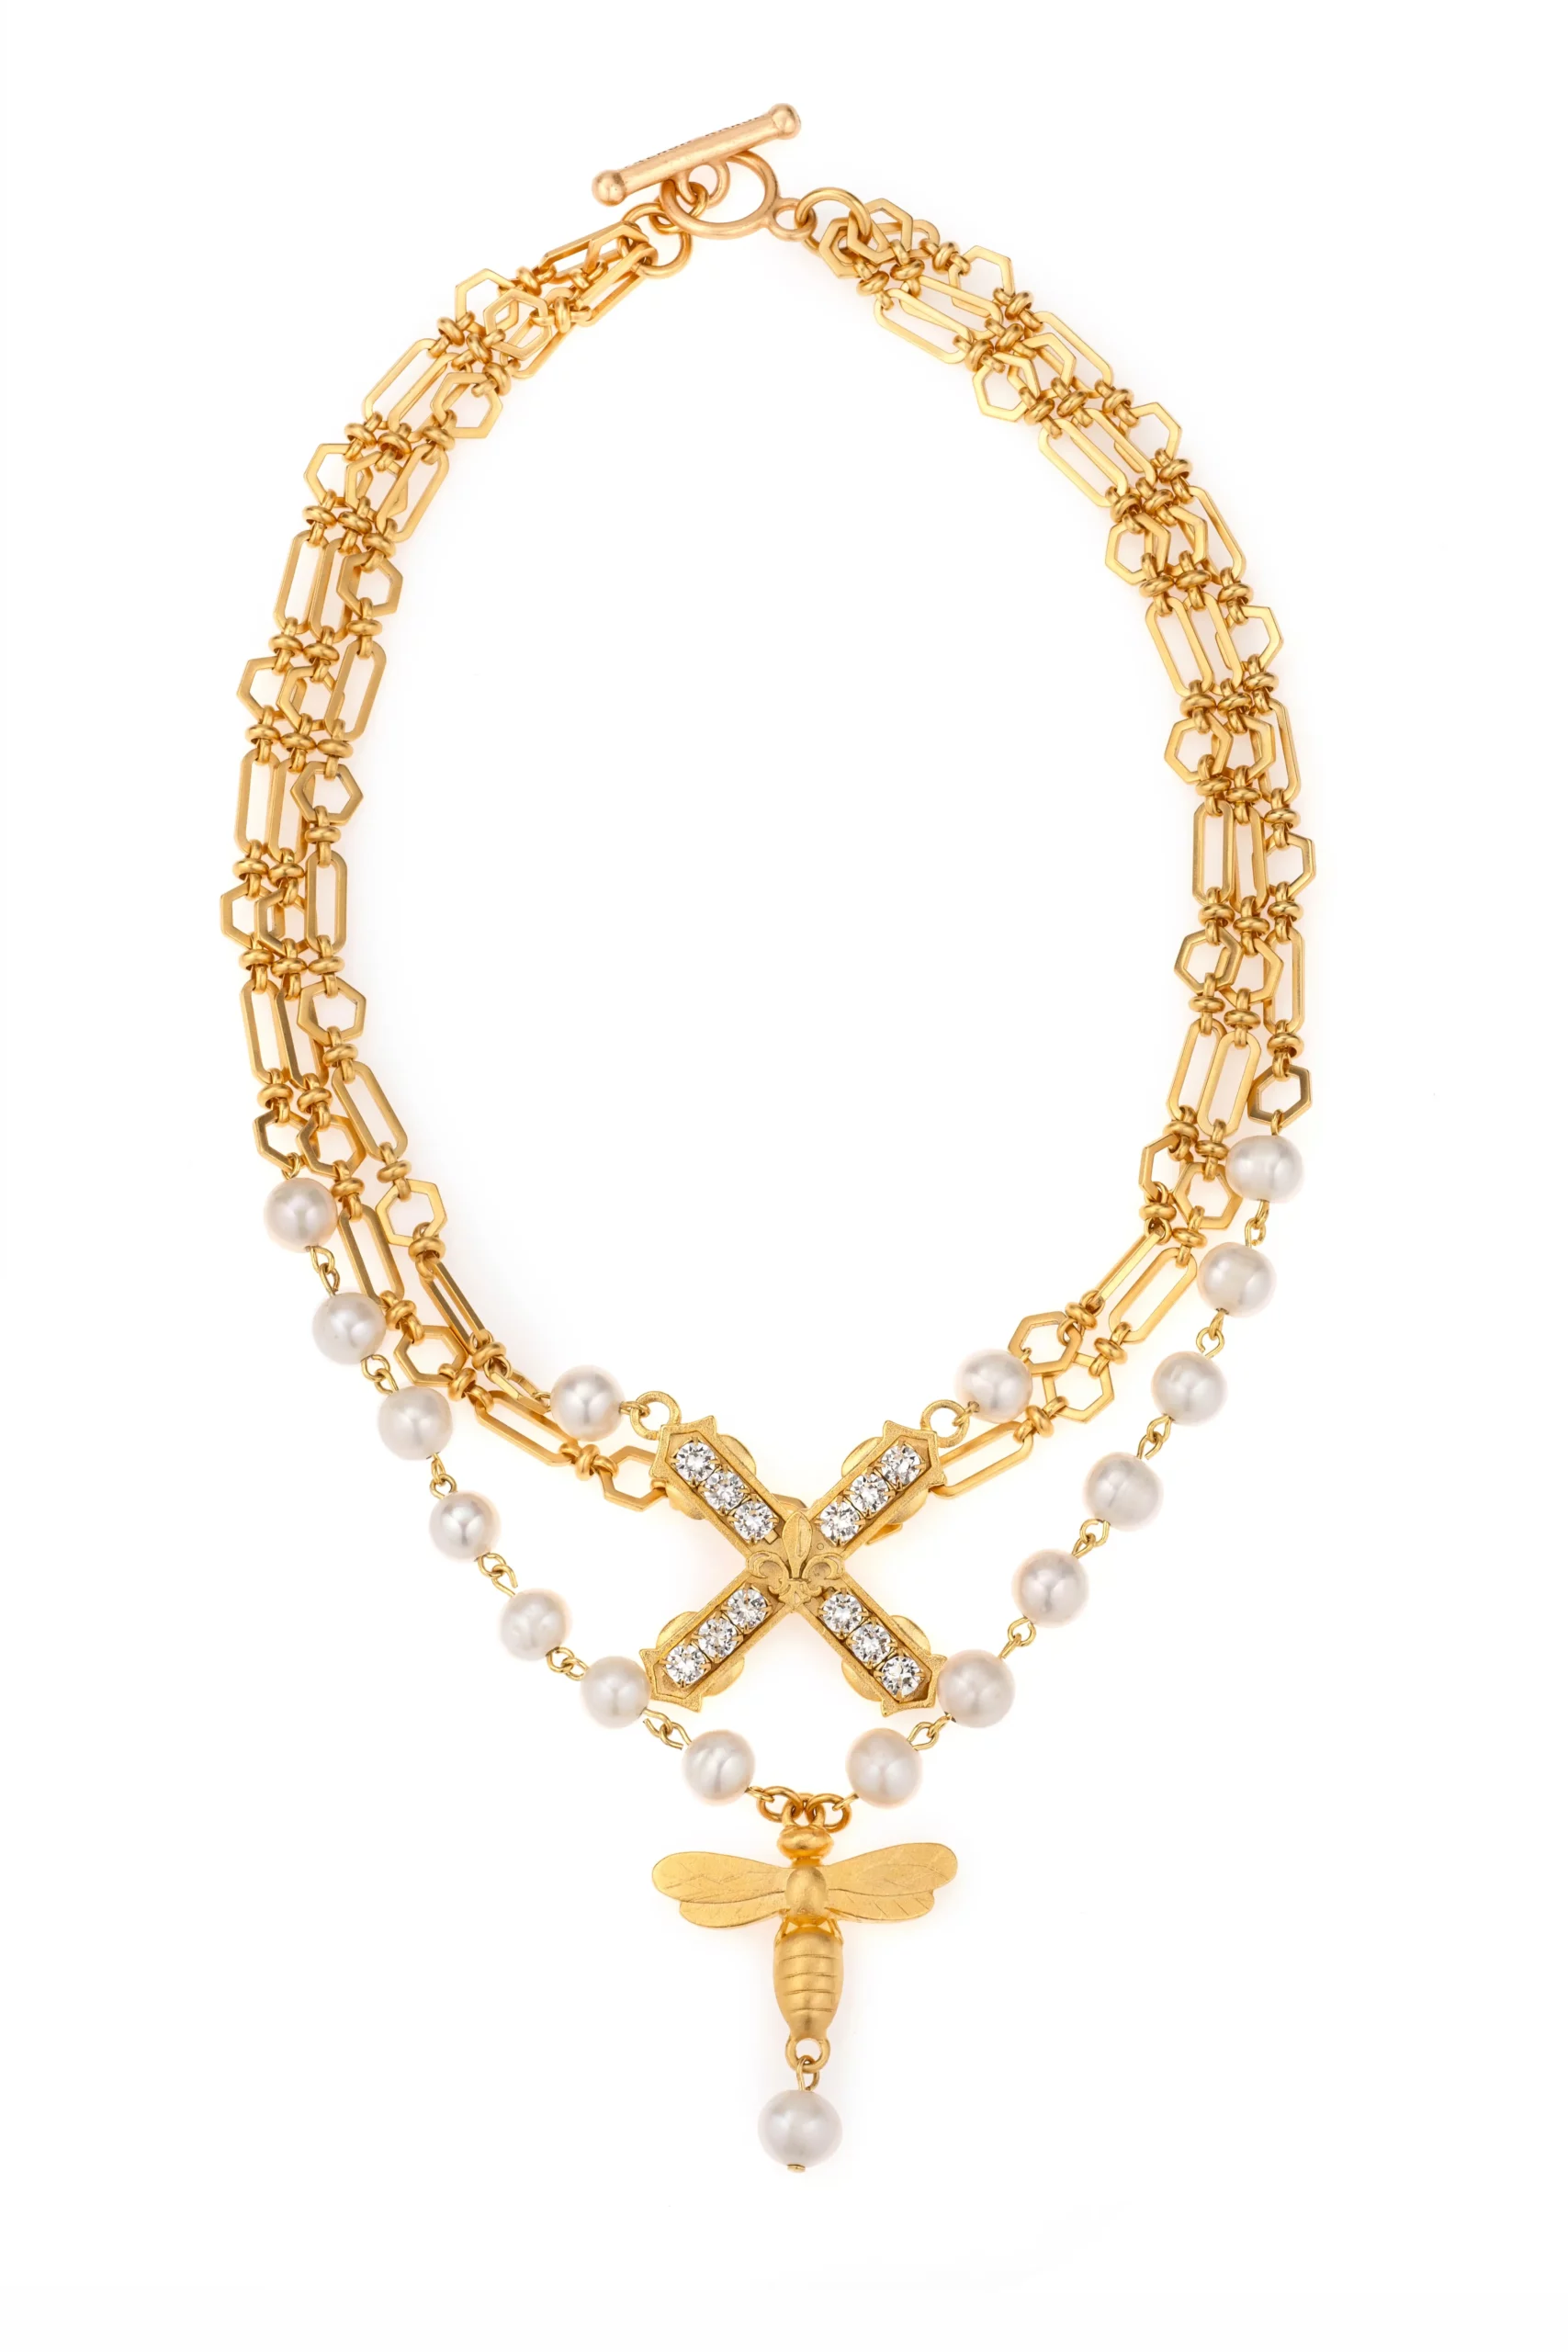 French Kande The Citron freshwater pearls necklace